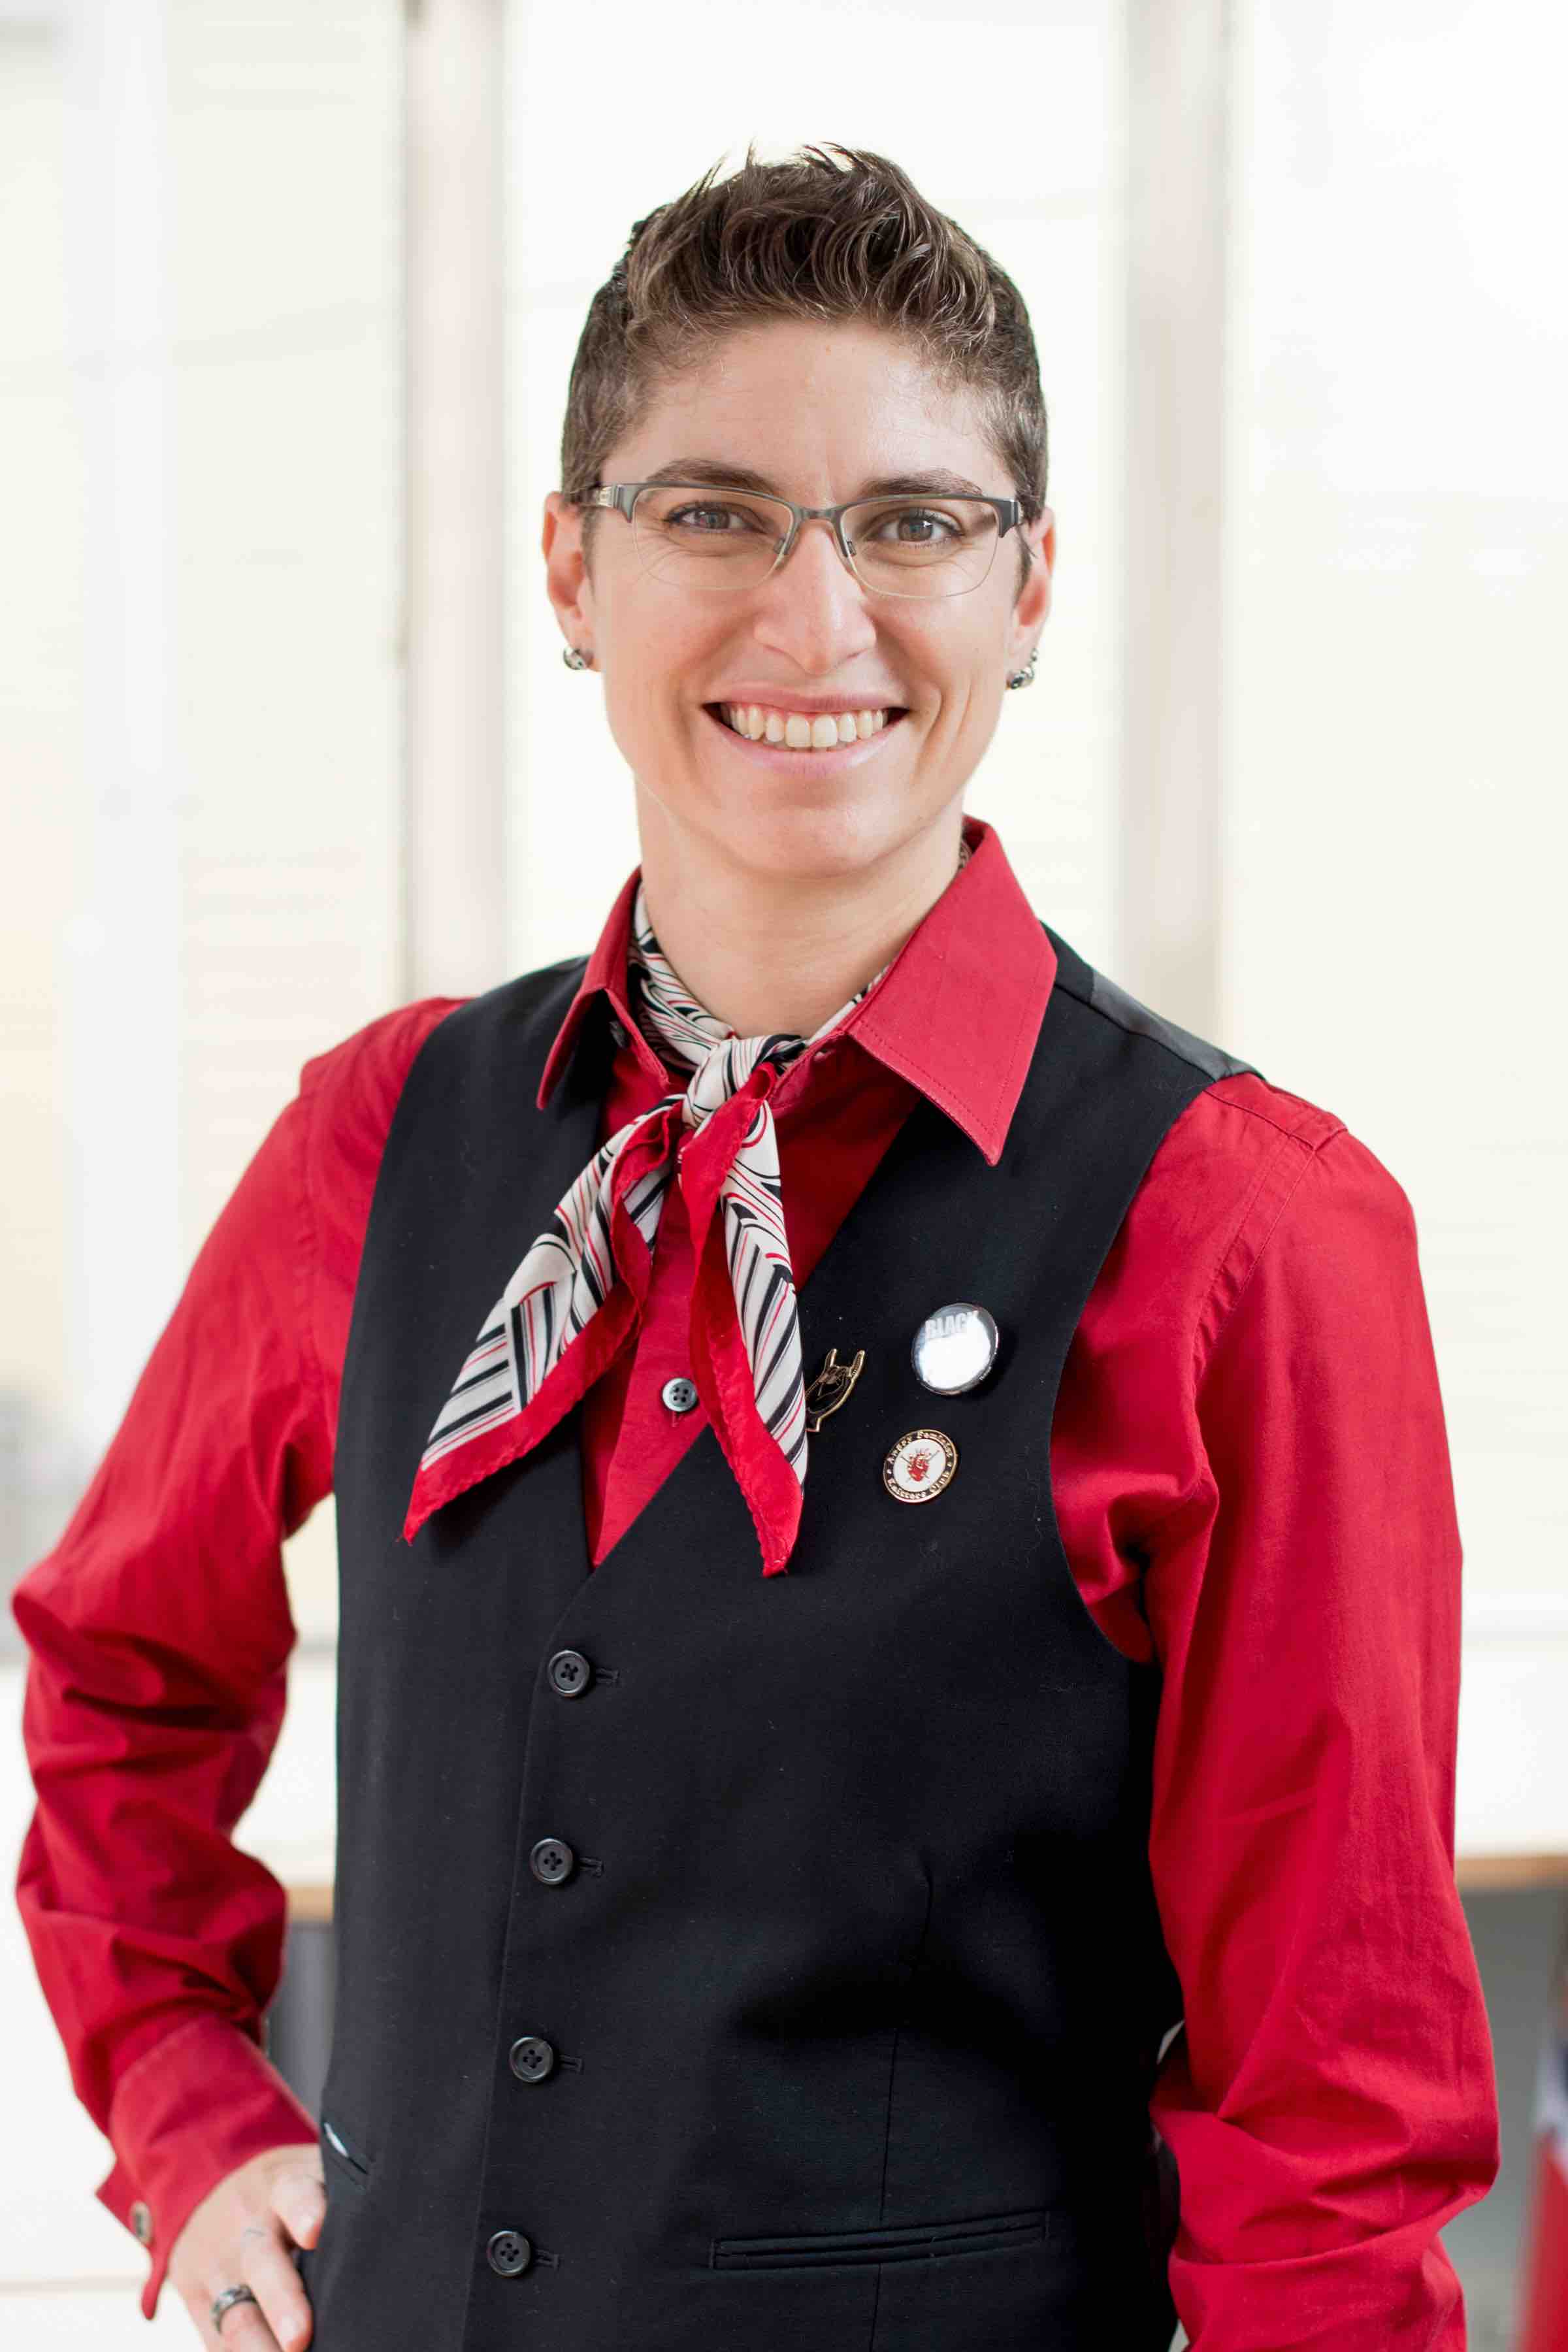 Jenn Steinfeld poses with a red shirt, black vest, and hand on hip